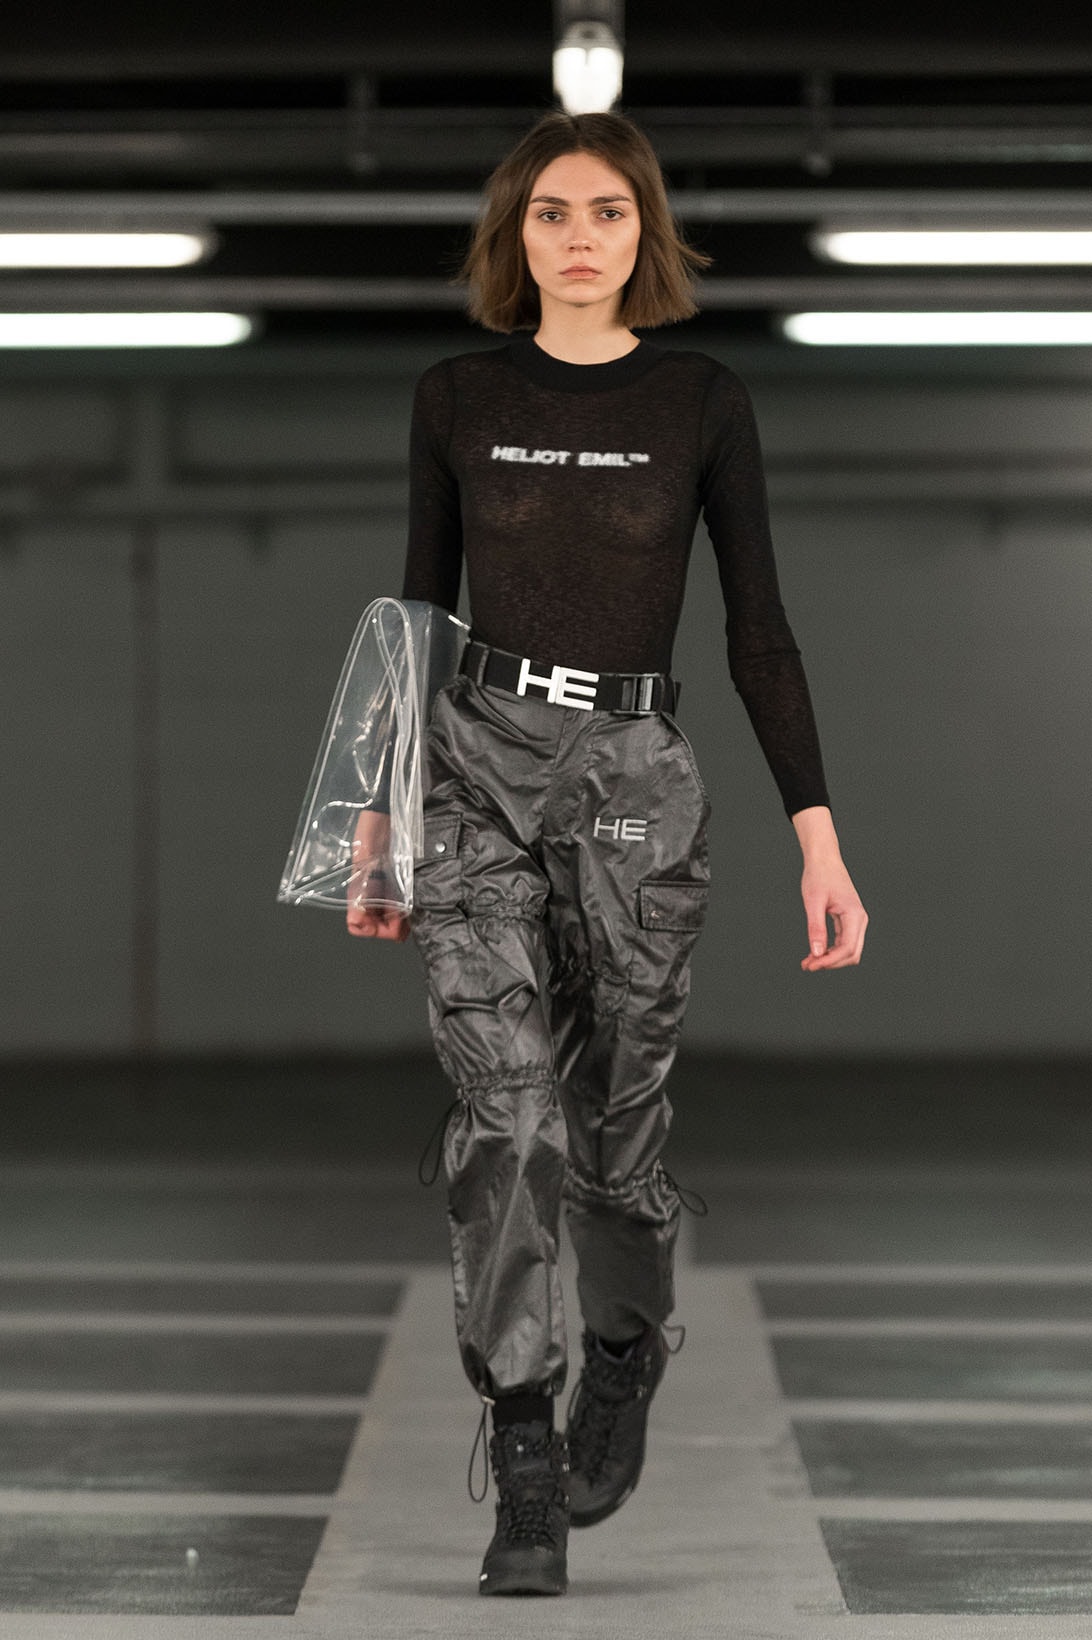 HELIOT EMIL 2018 Fall Winter Collection Runway INTENDED CONSEQUENCES juul brothers julius victor copenhagen